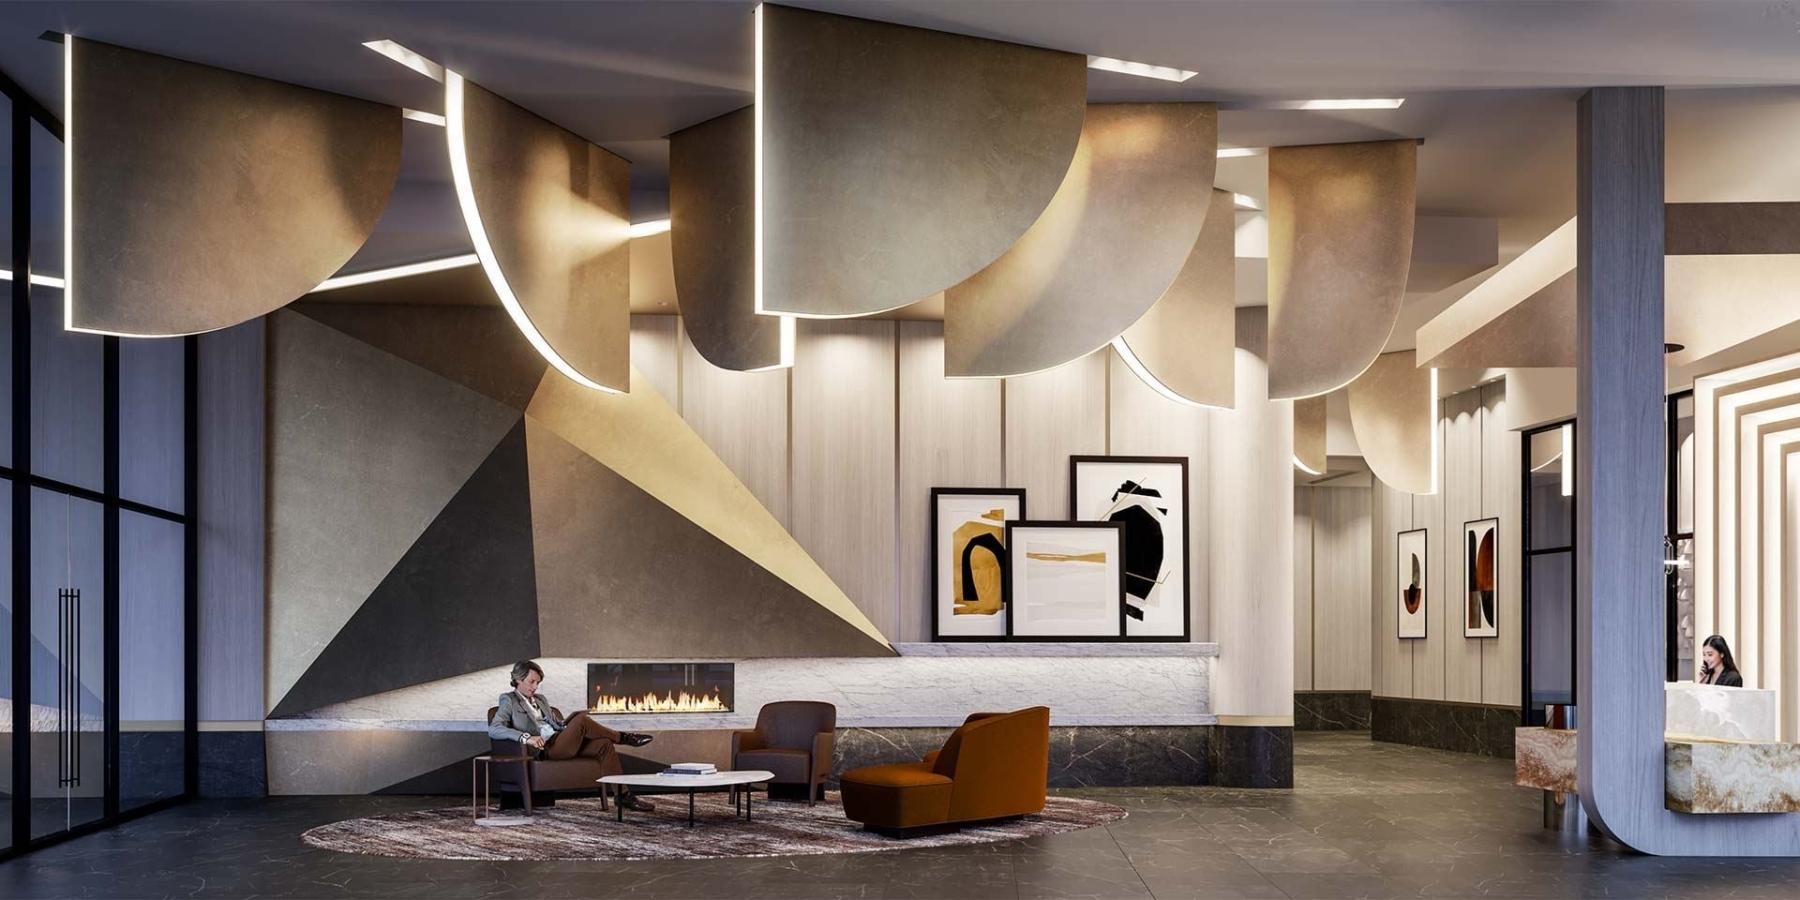 The Dupont Condos lobby with lounge